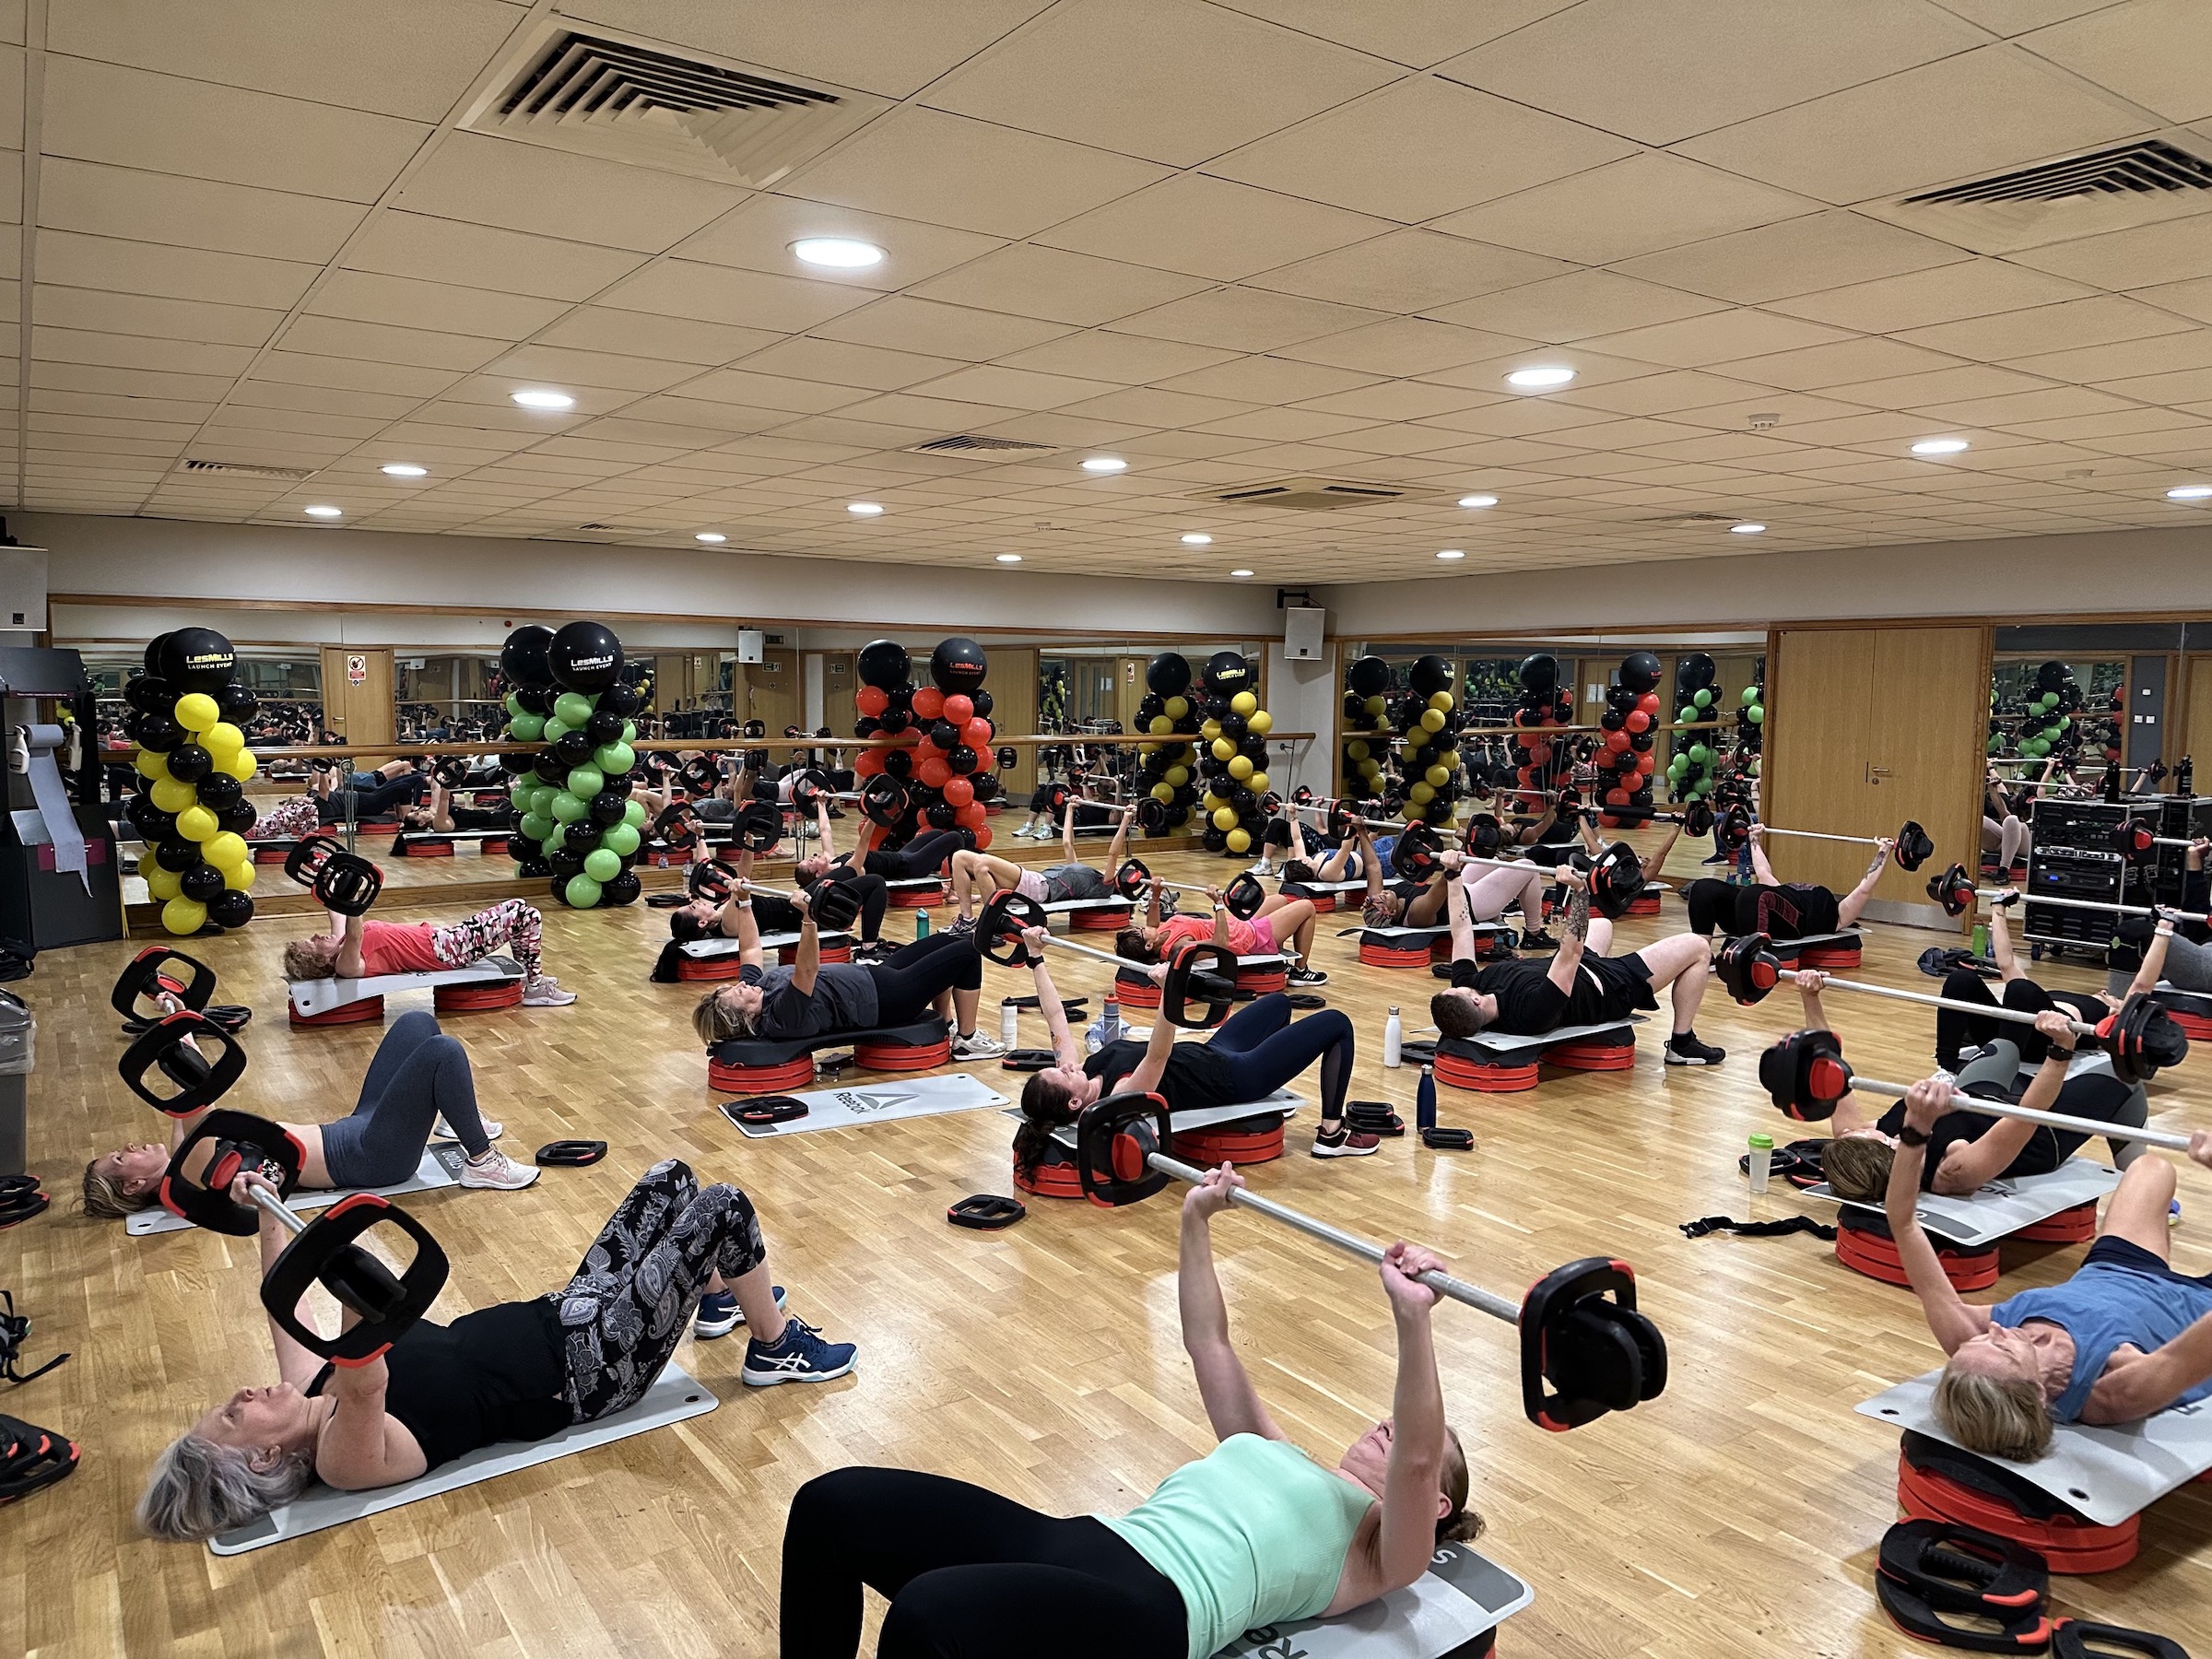 Group Exercise class at Serco Leisure / Serco Leisure